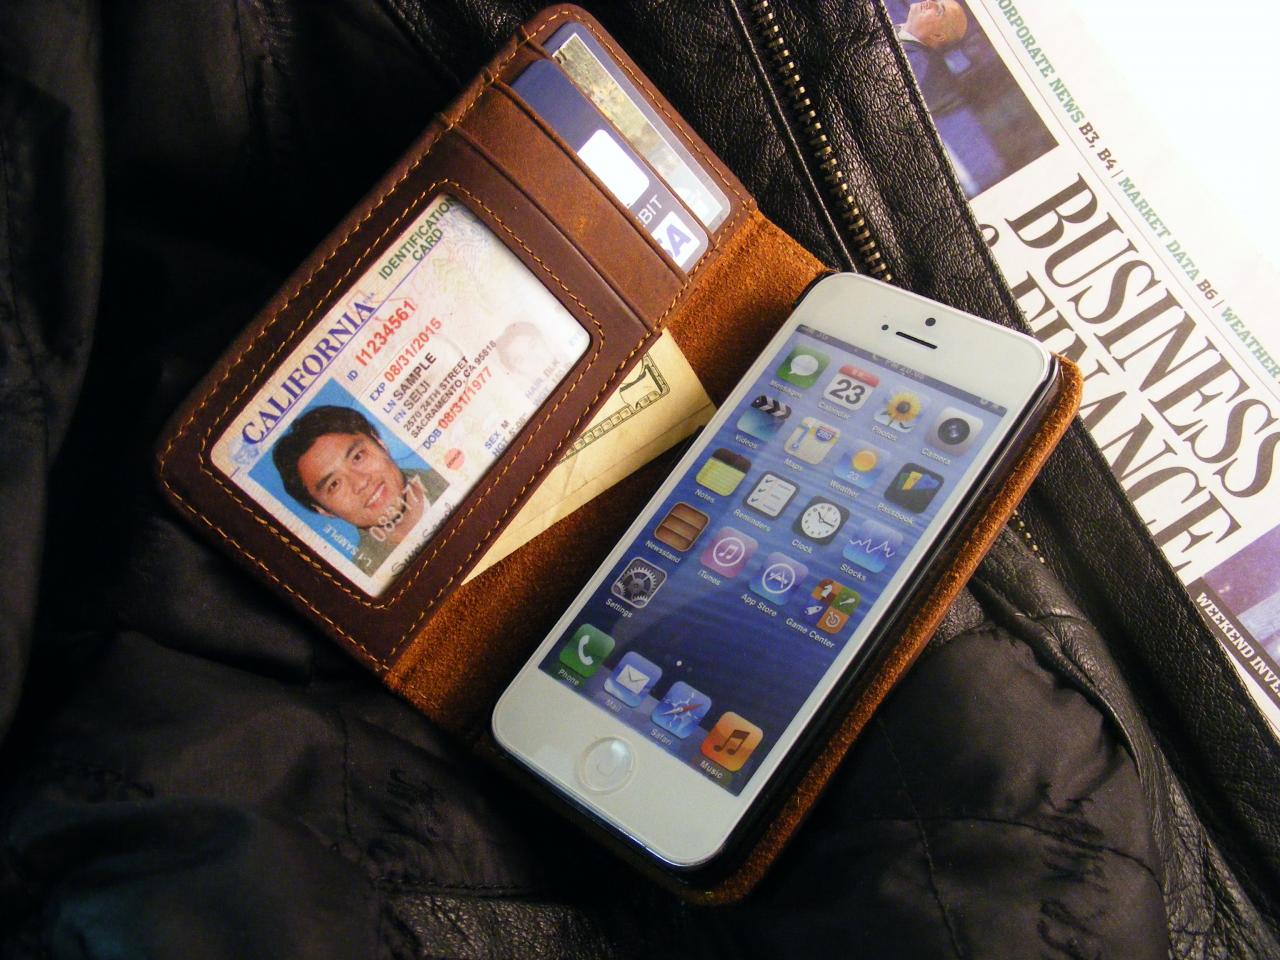 Leather Premium Pocket Book Case For Iphone 4 Or Iphone 5, 5s, Or 5c